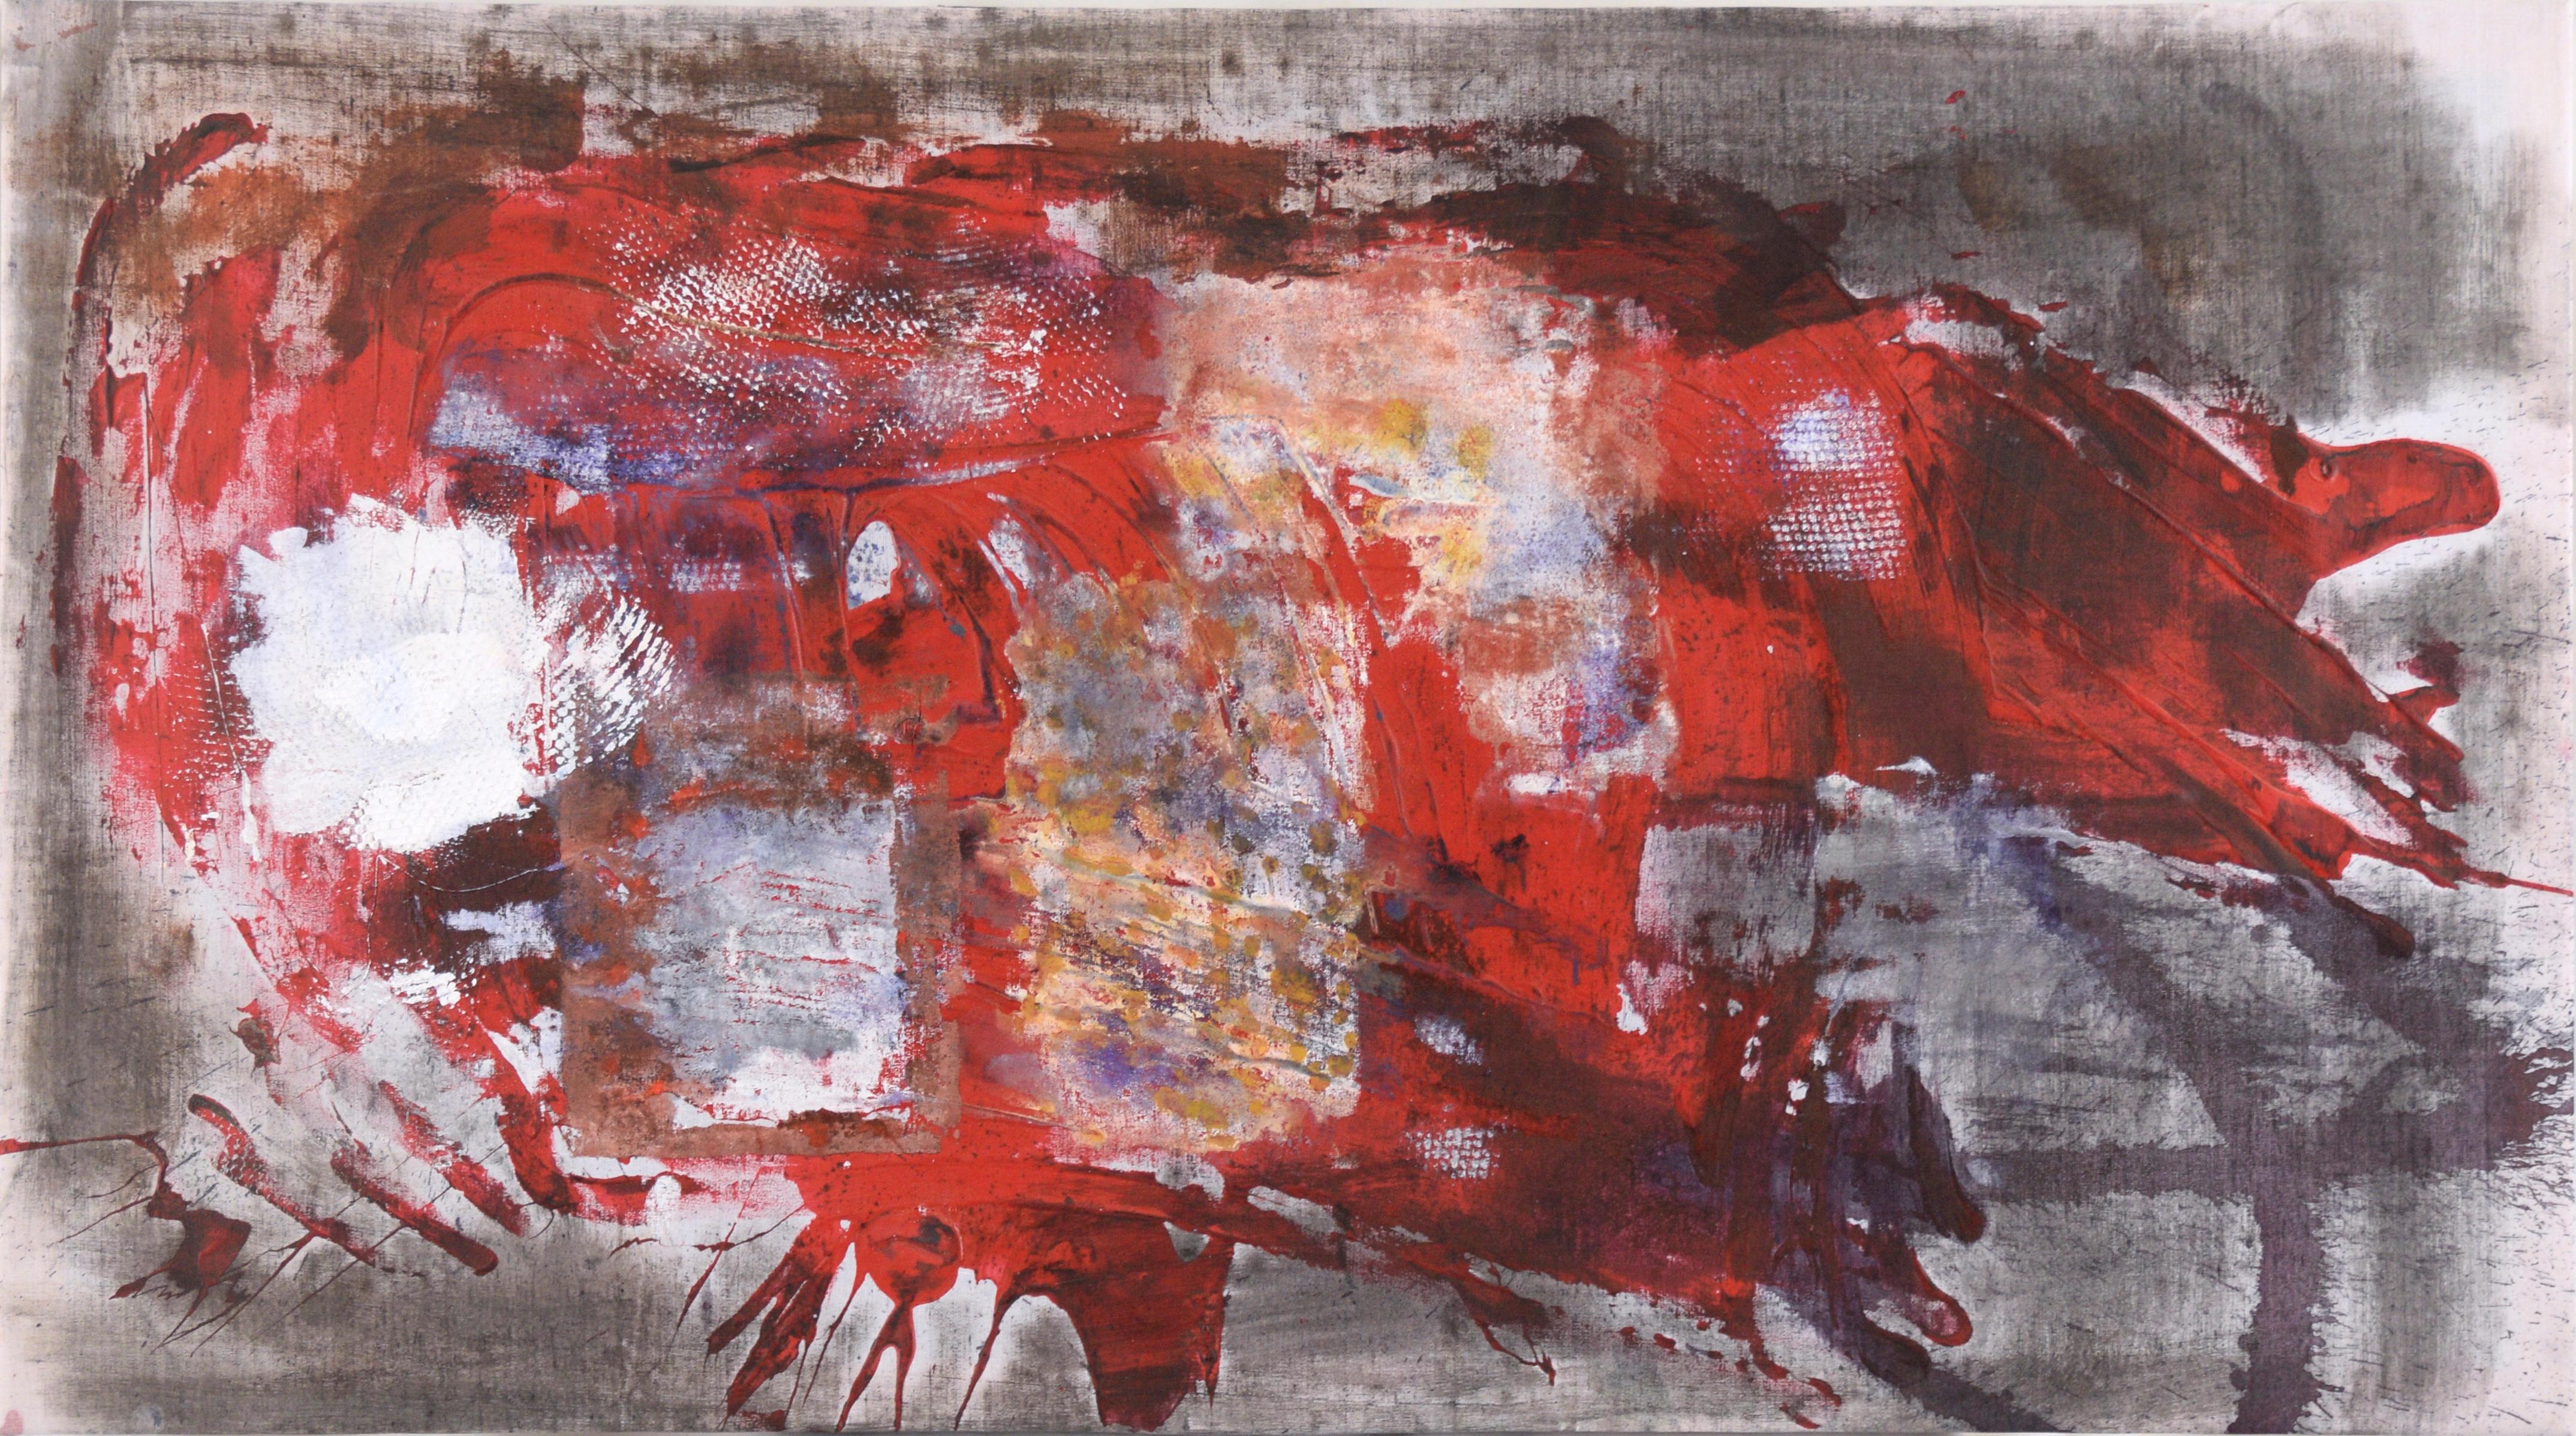 Red Splatters on  Grey Field - Abstract Expressionist in Acrylic on Linen